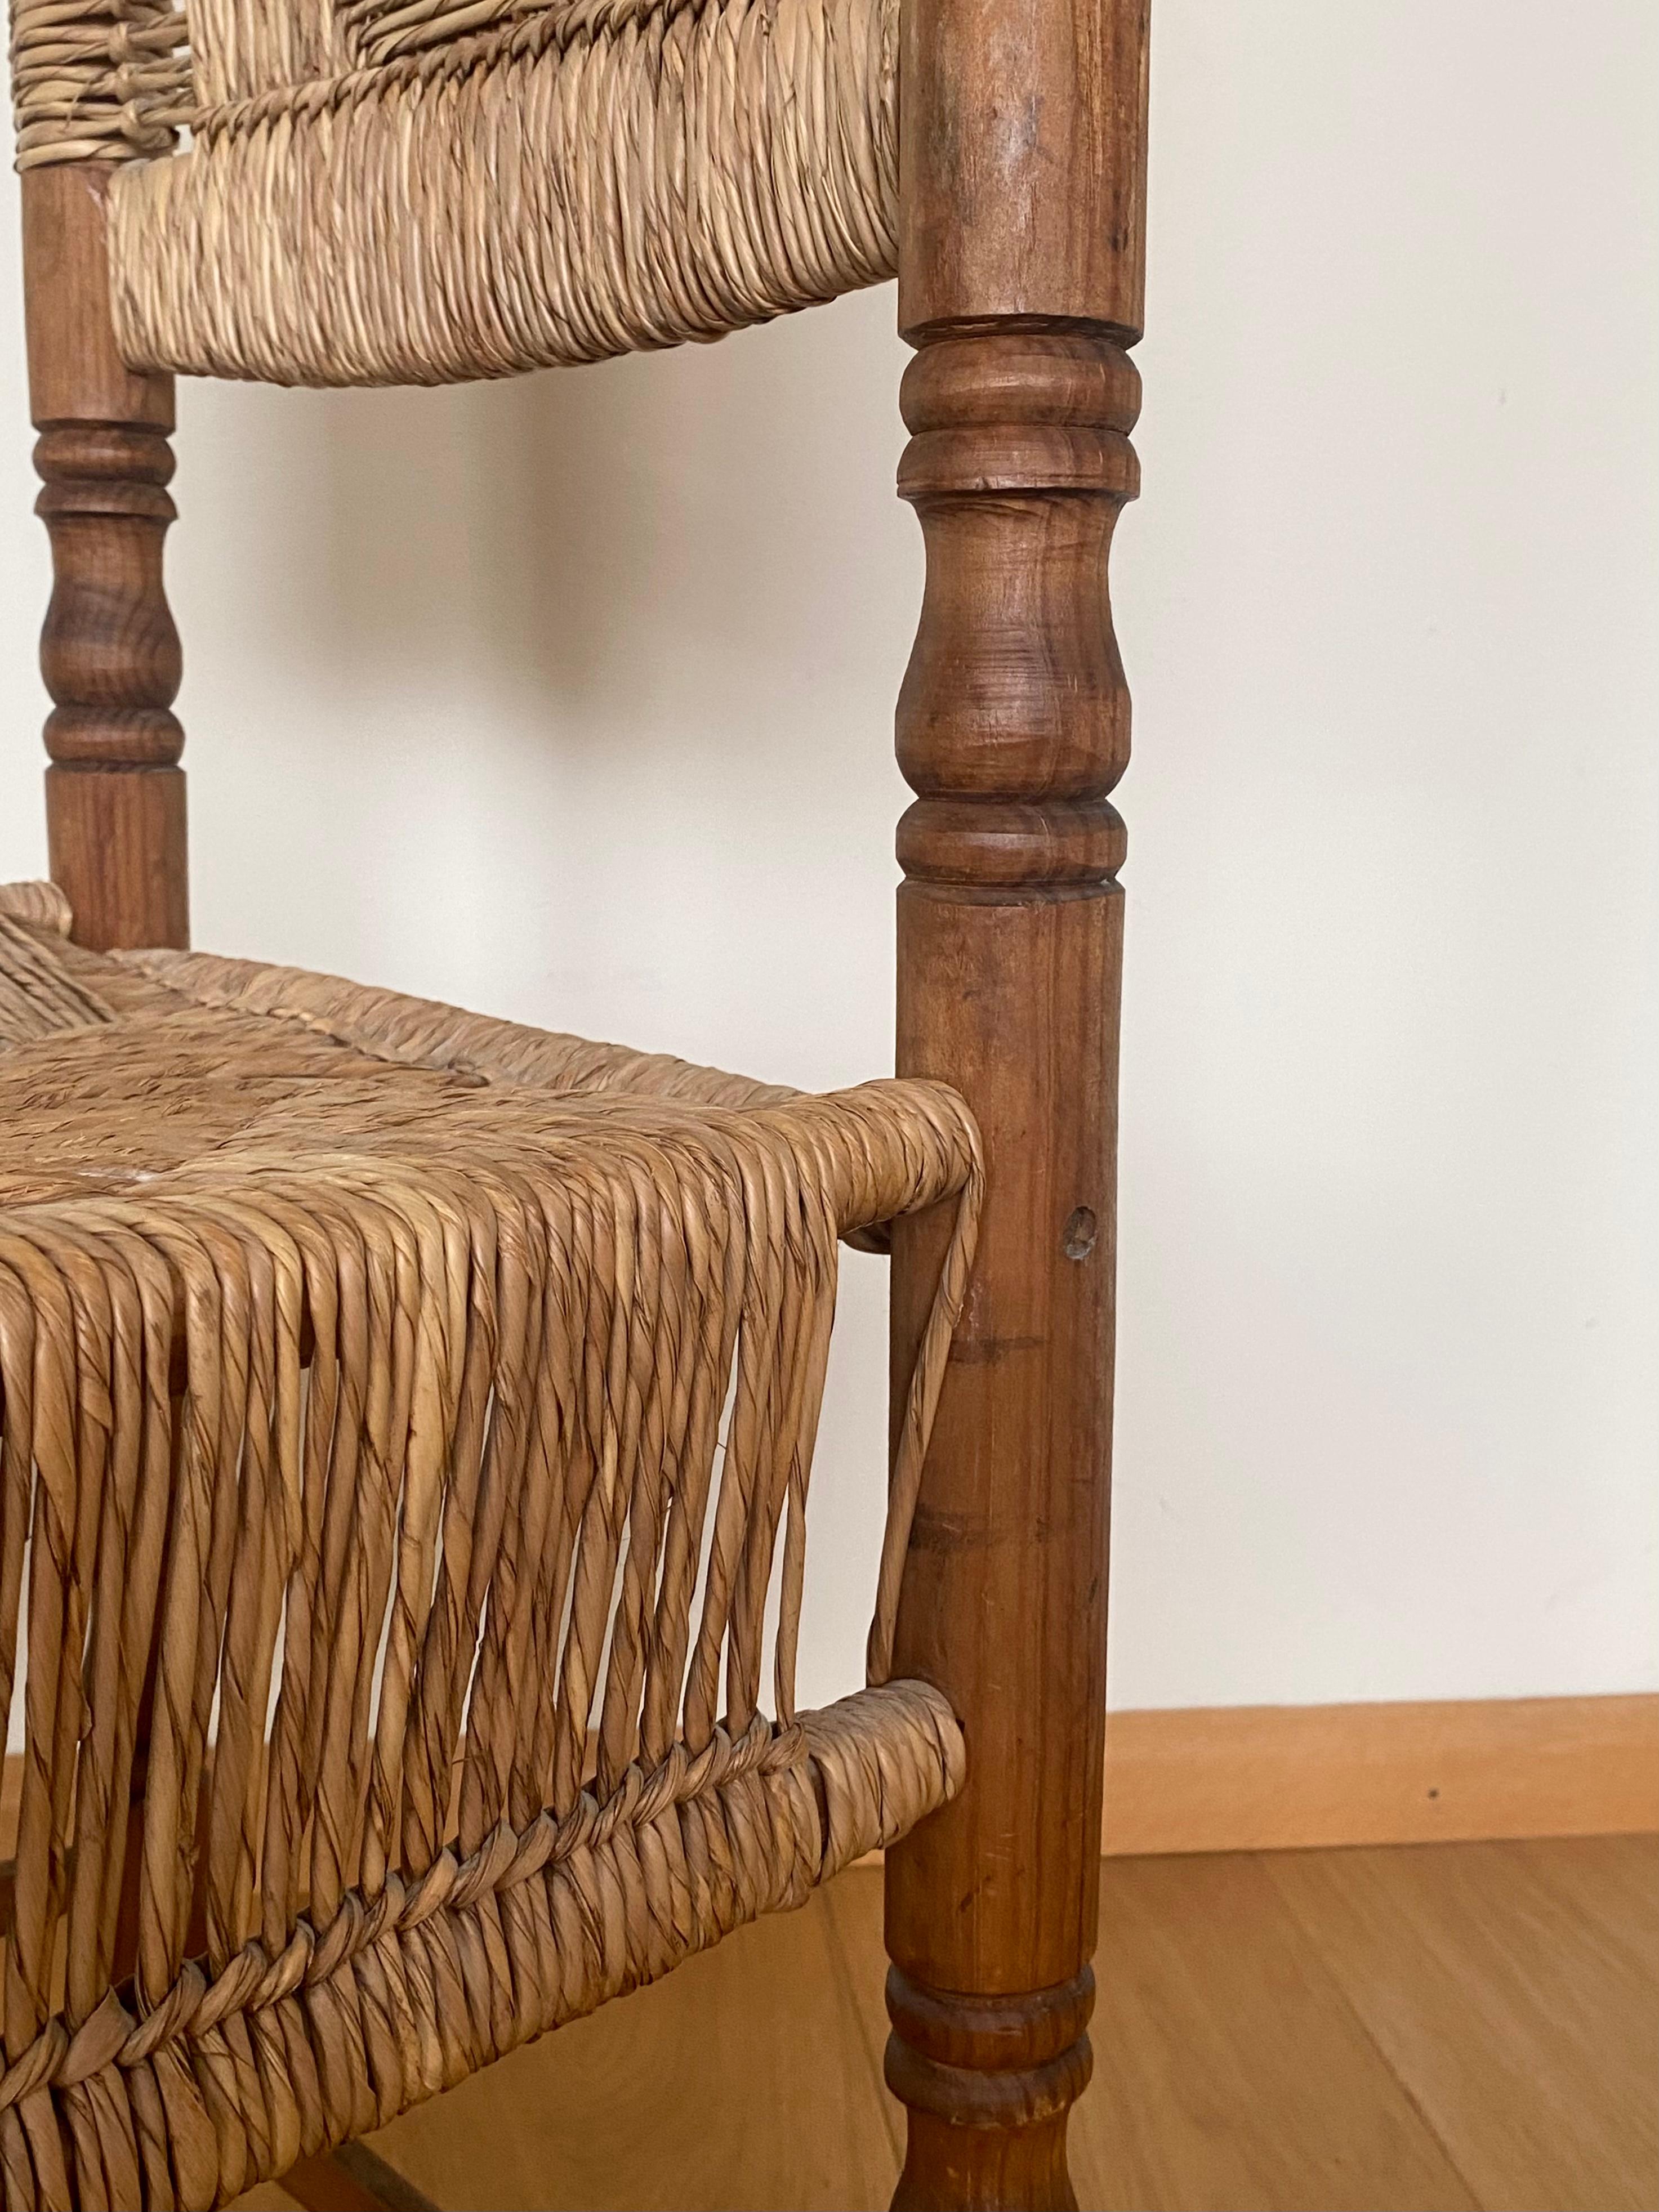 20th Century North American Rustic, Vintage, Wooden Chair with Woven Seat For Sale